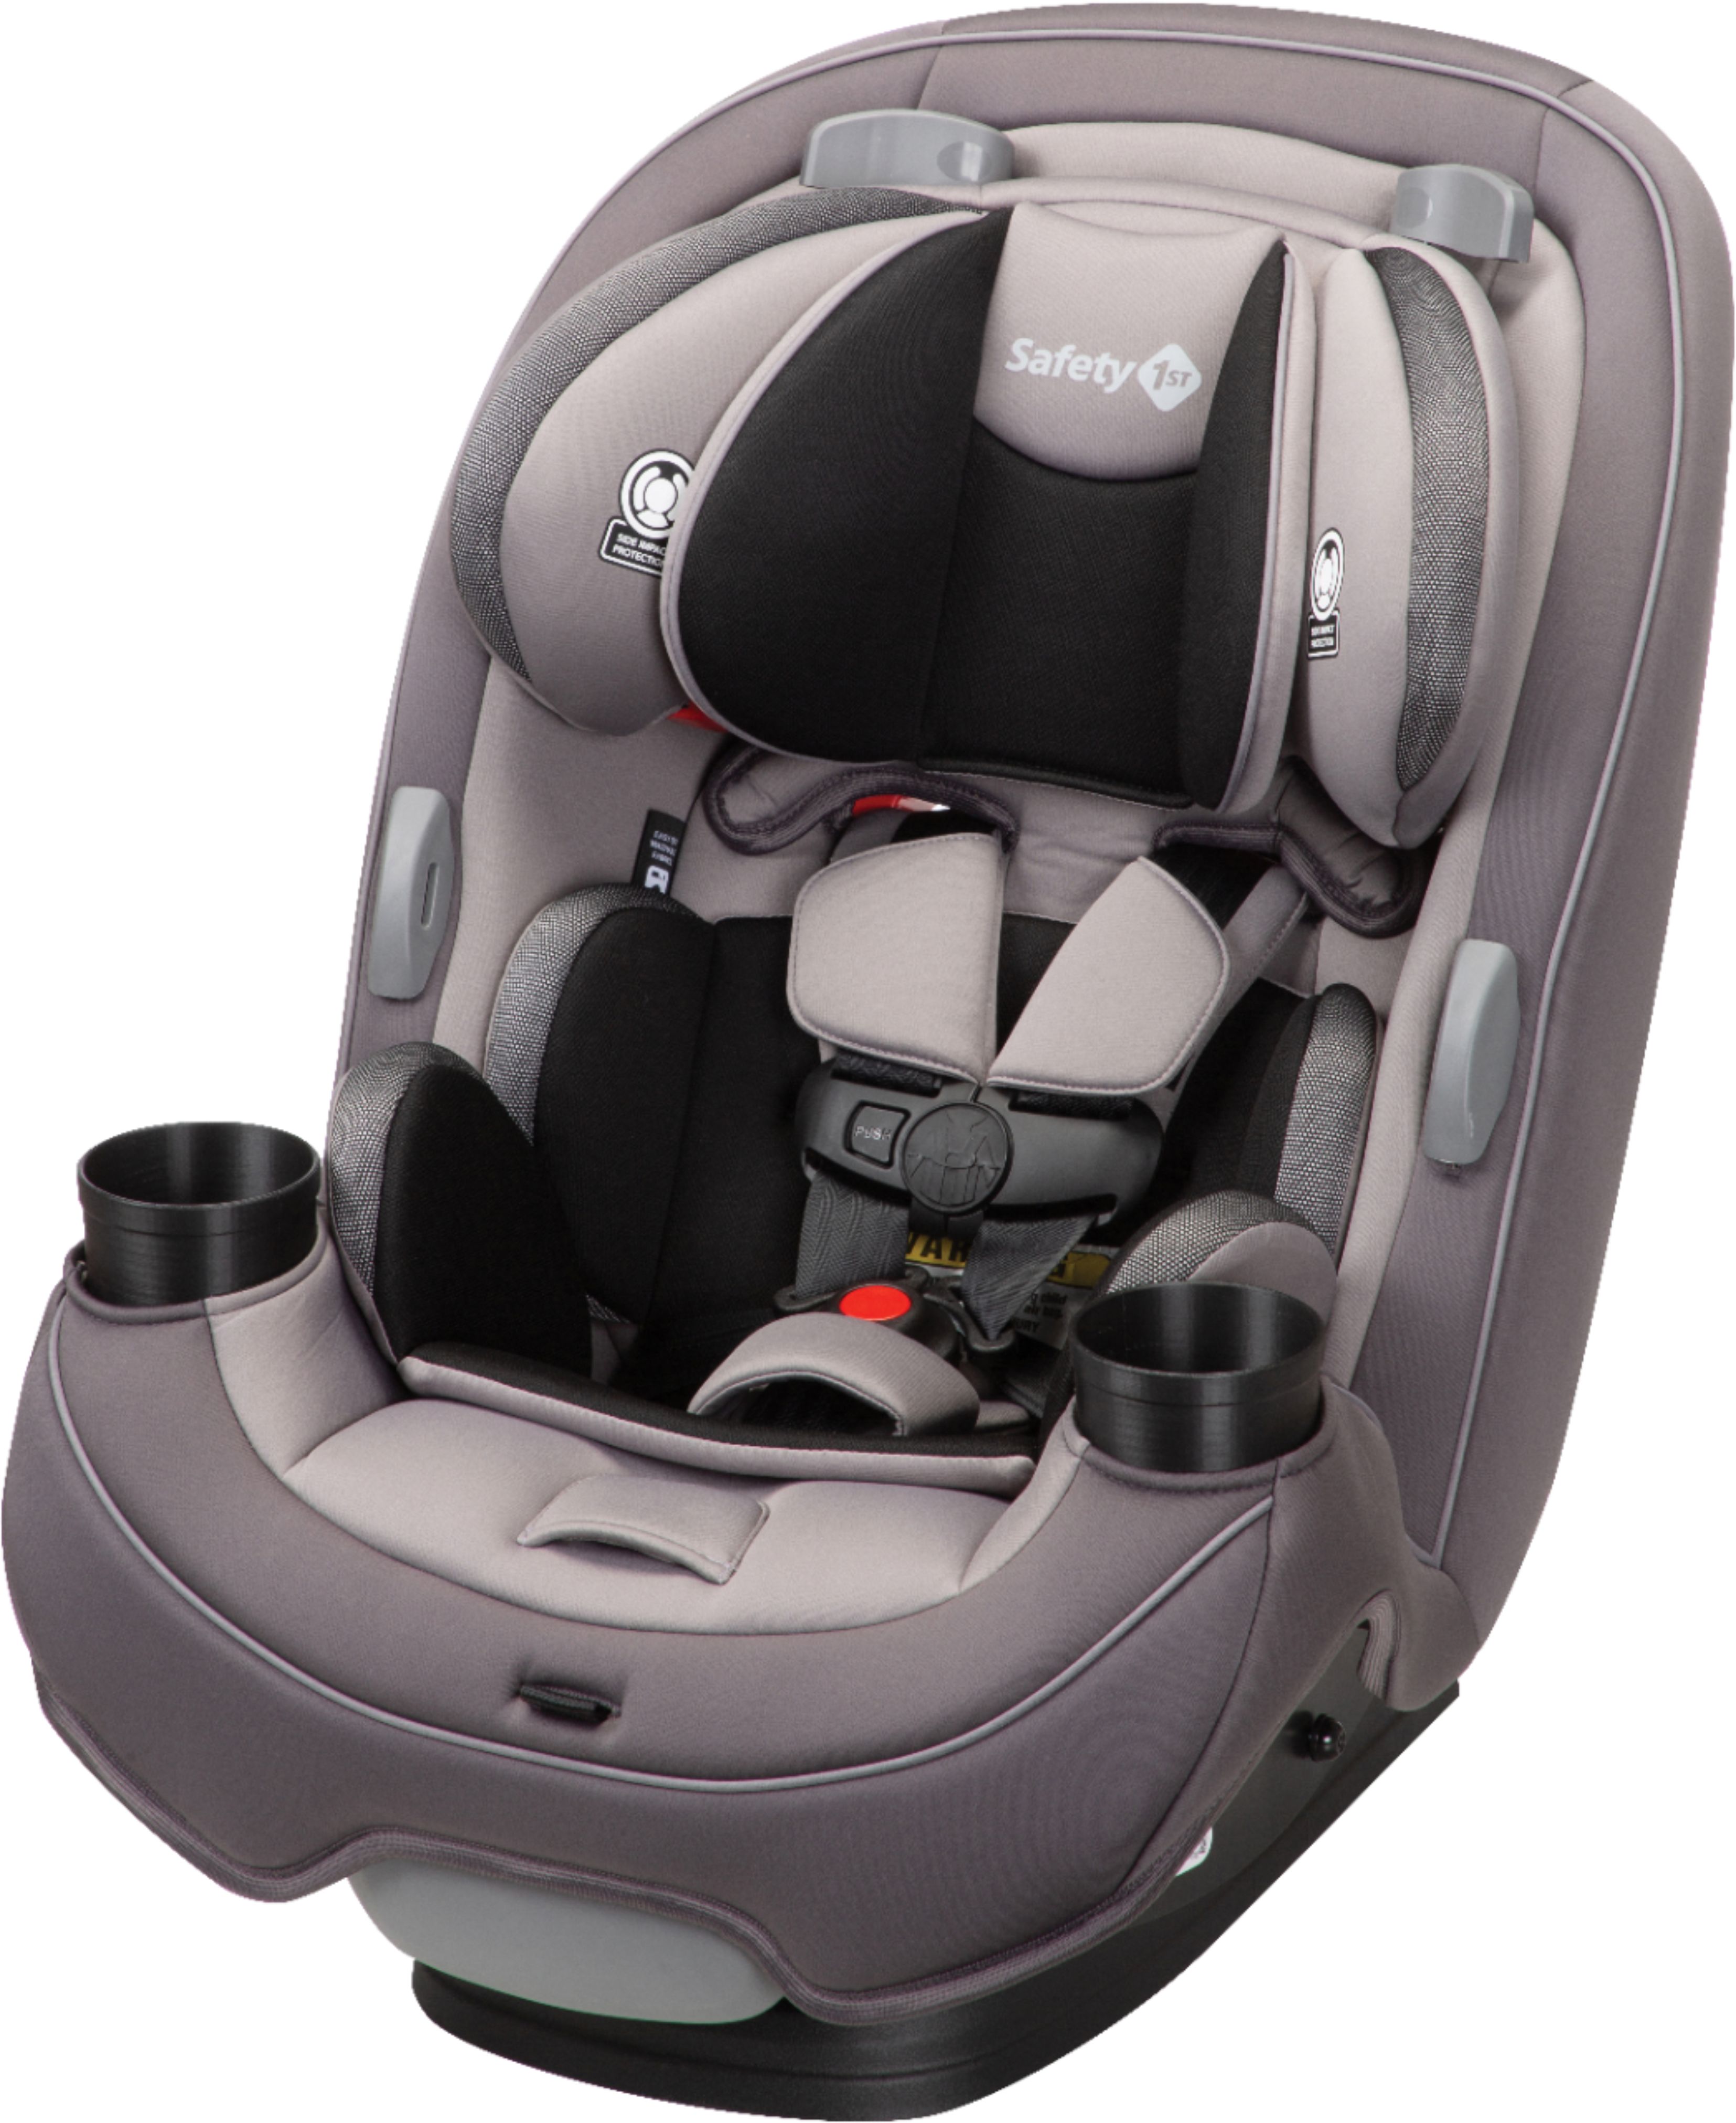 Left View: Safety 1st - Jive 2 in 1 Convertible car seat - grey